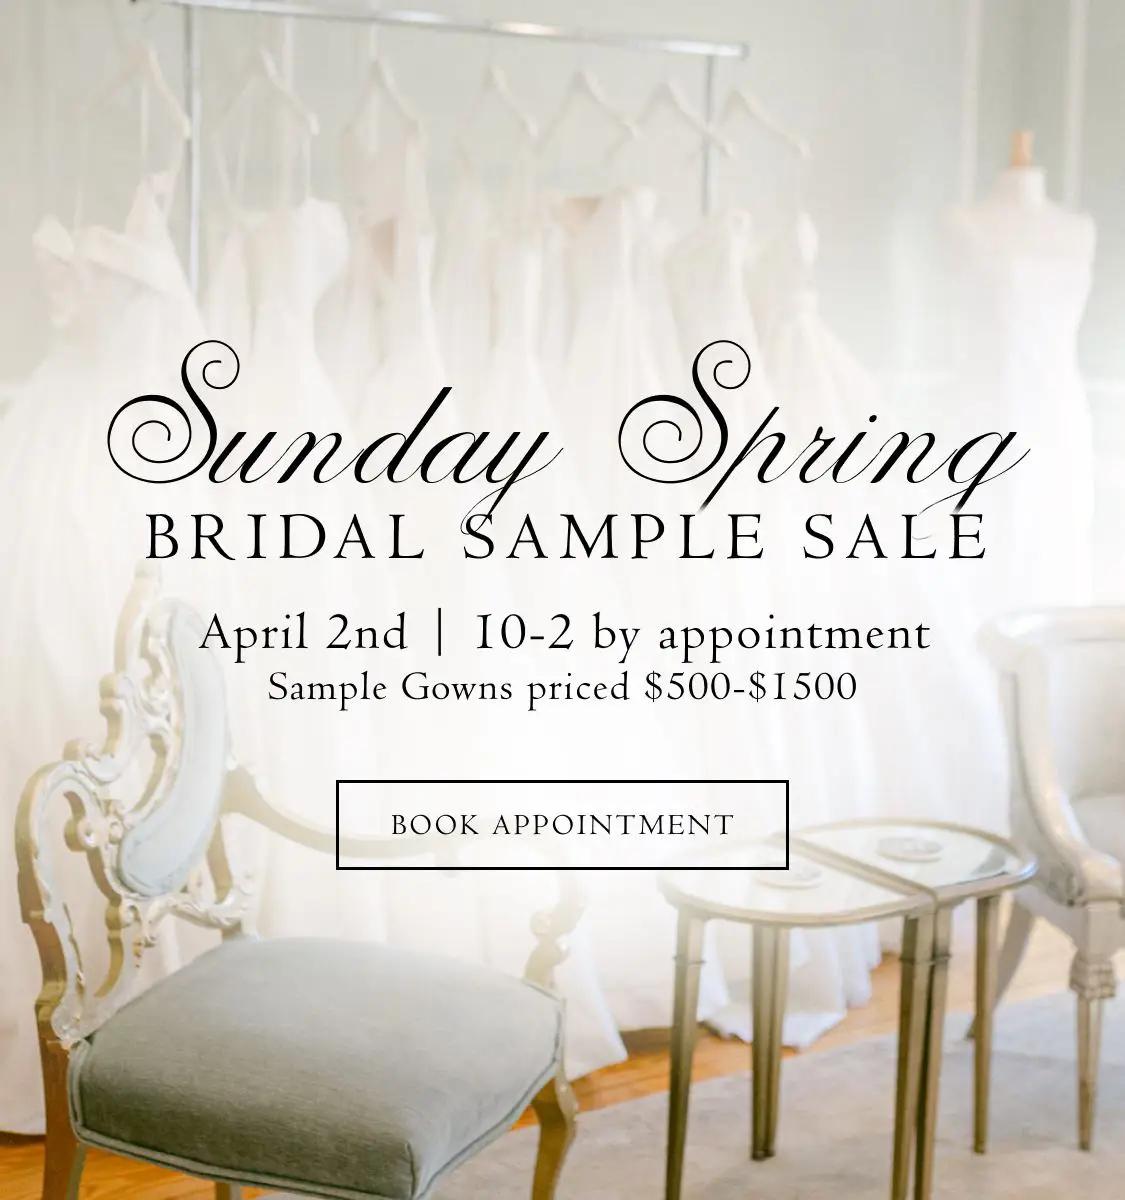 Sunday Spring Sample Sale at White Dress by the Shore